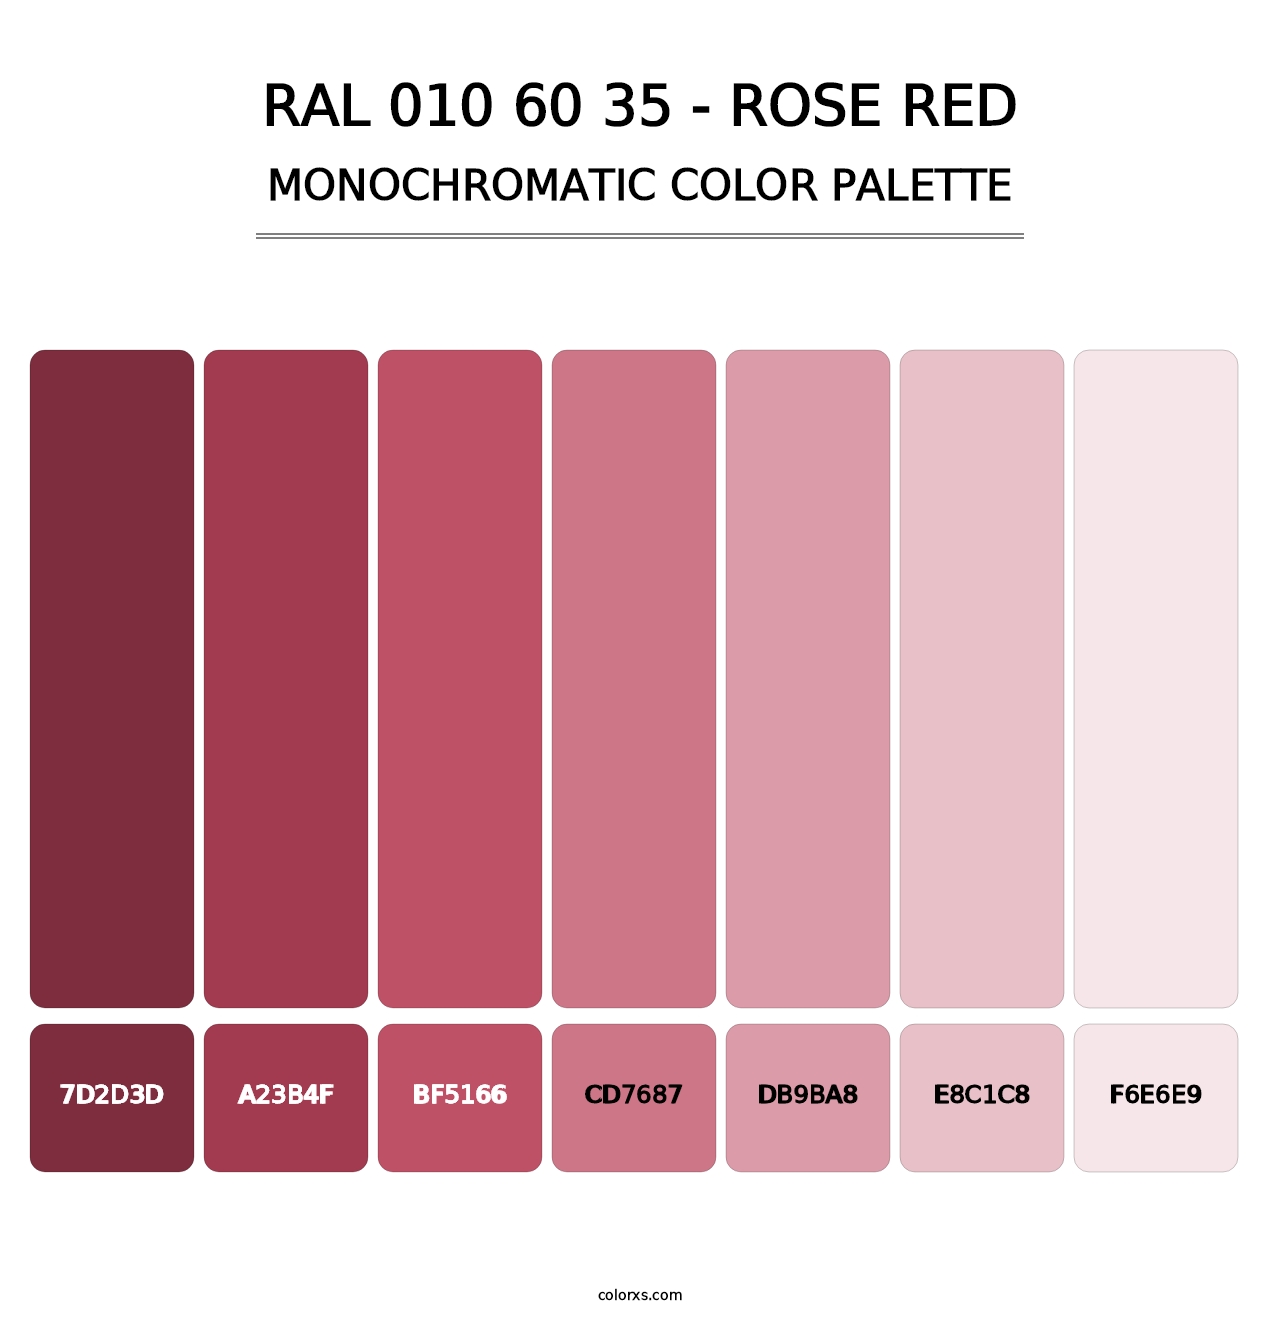 RAL 010 60 35 - Rose Red - Monochromatic Color Palette